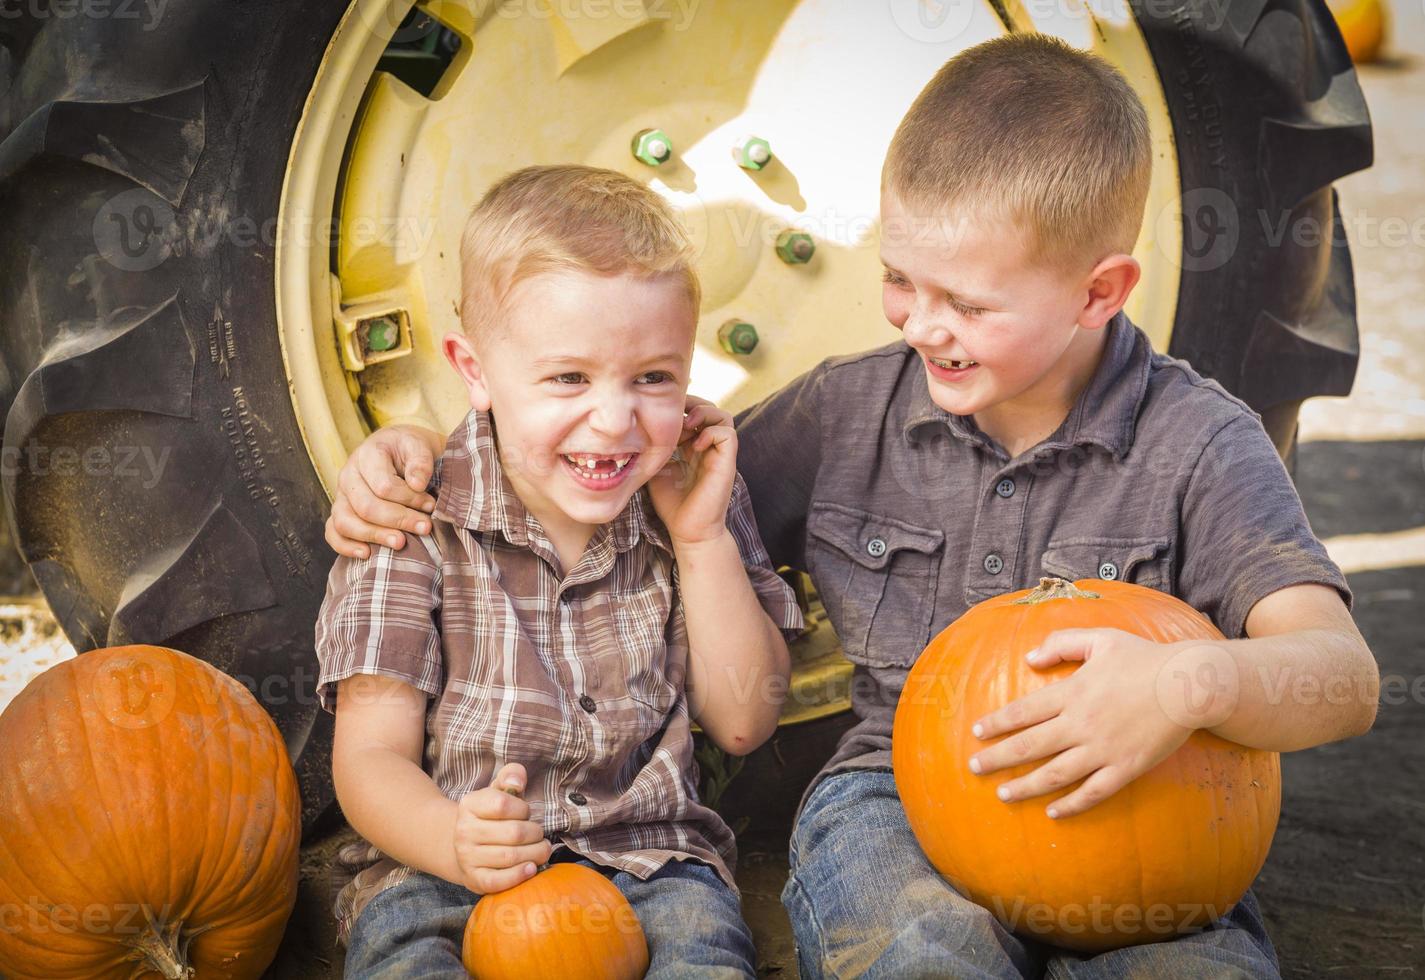 Two Boys Having Fun at the Pumpkin Patch on a Fall Day. photo